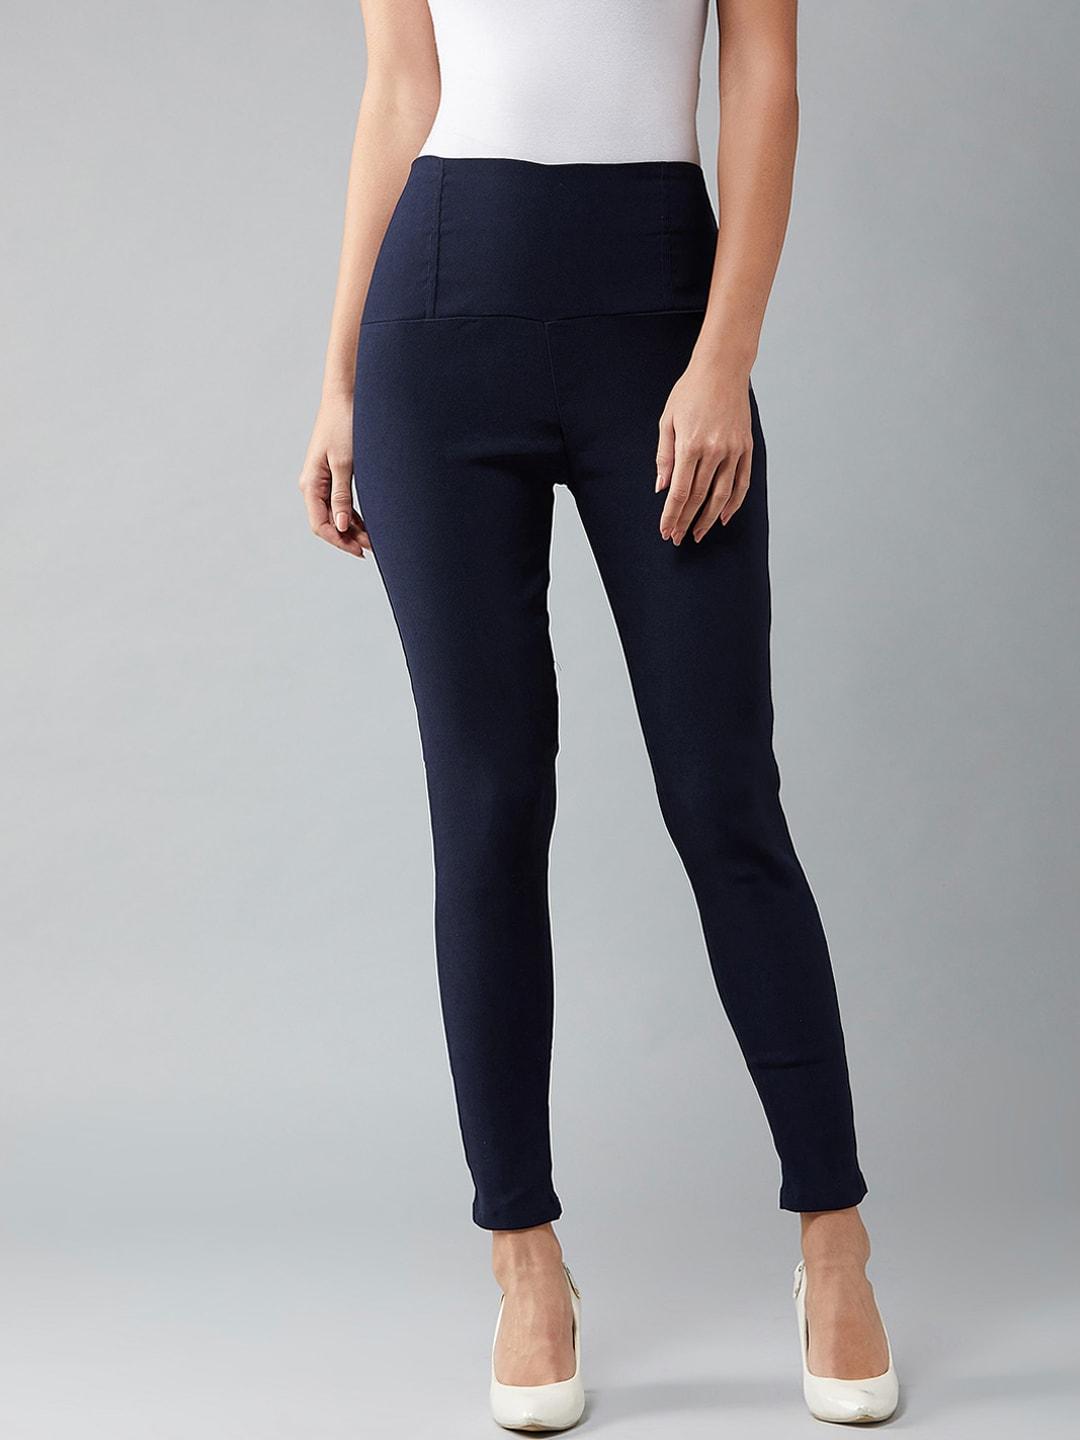 dolce-crudo-women-navy-blue-solid-slim-fit-crop-high-rise-treggings